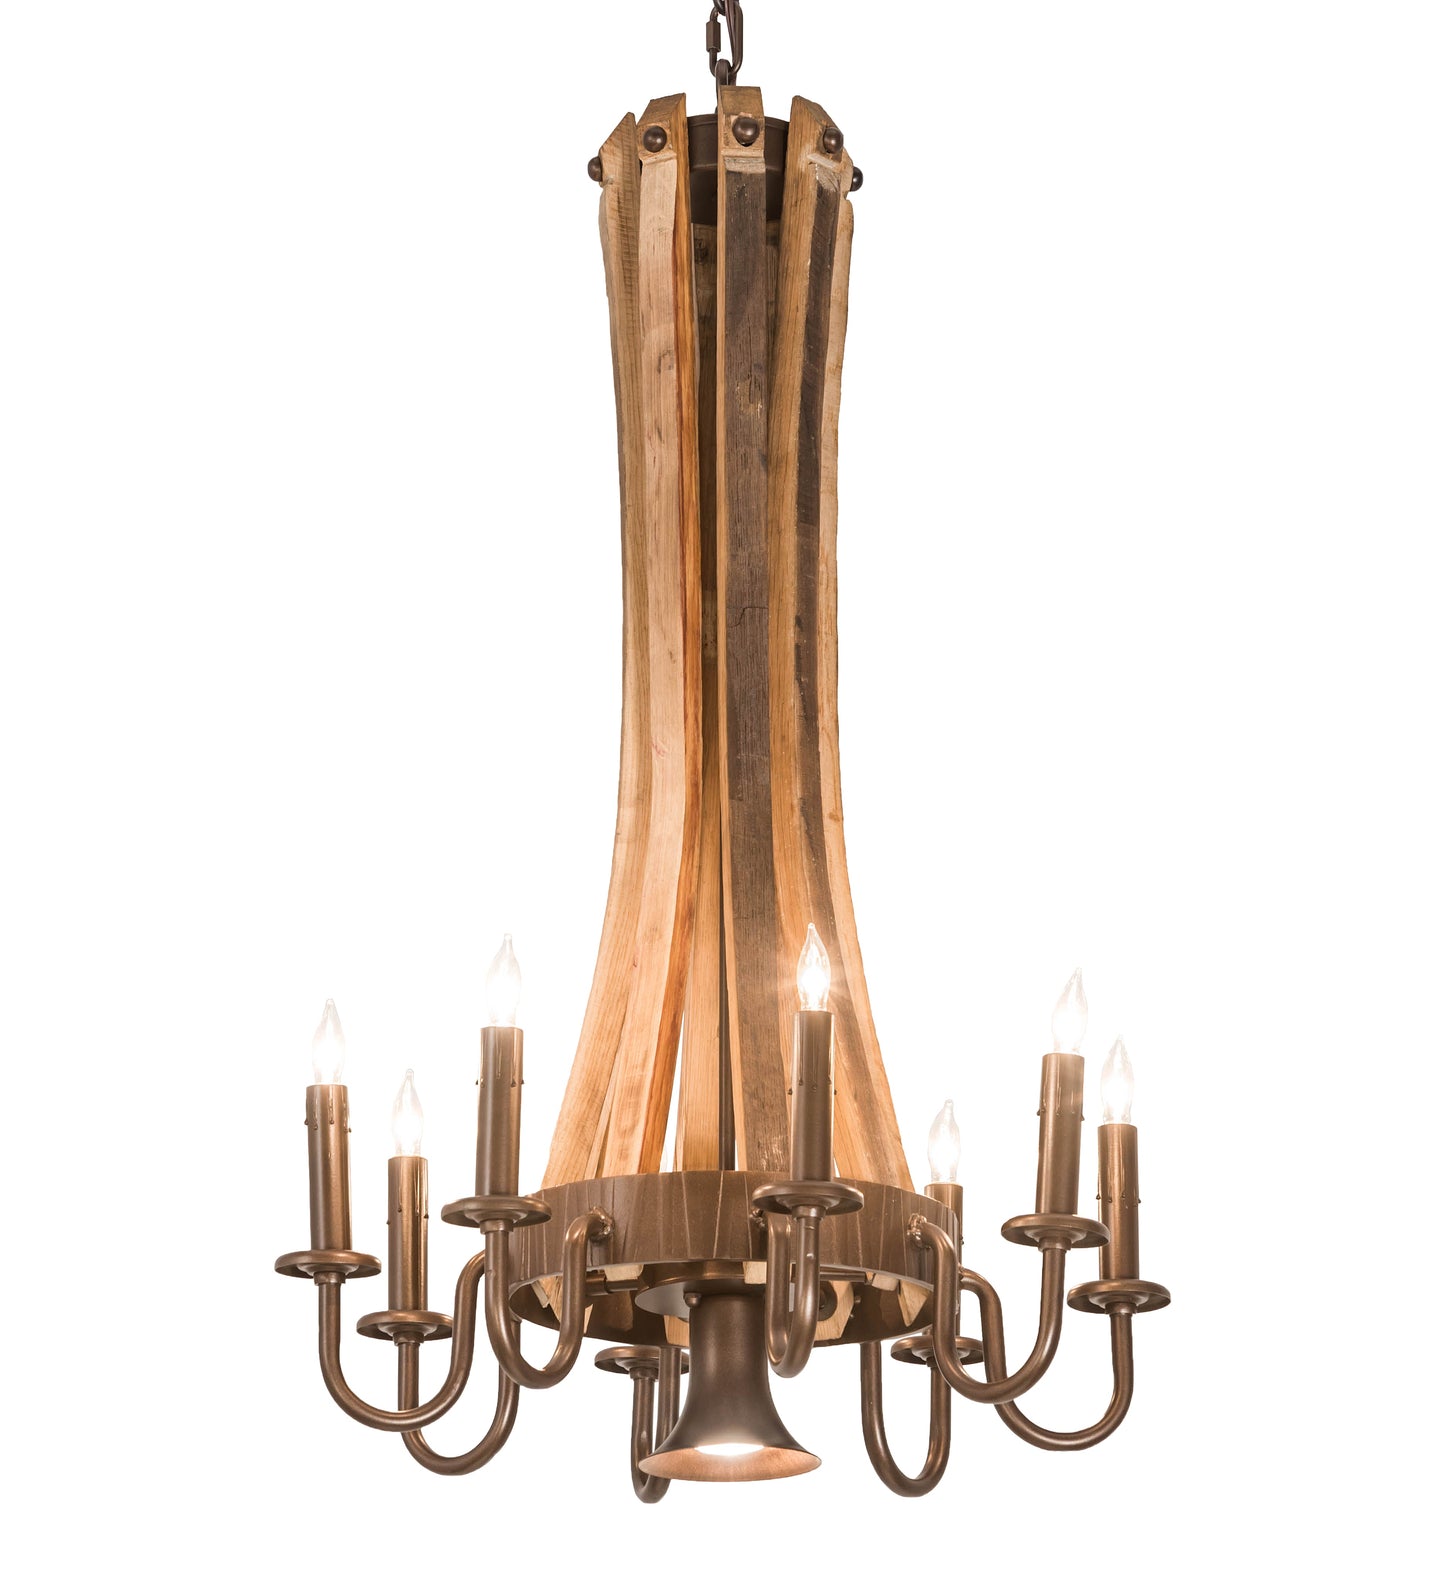 20" Barrel Stave Madera 8-Light Chandelier by 2nd Ave Lighting